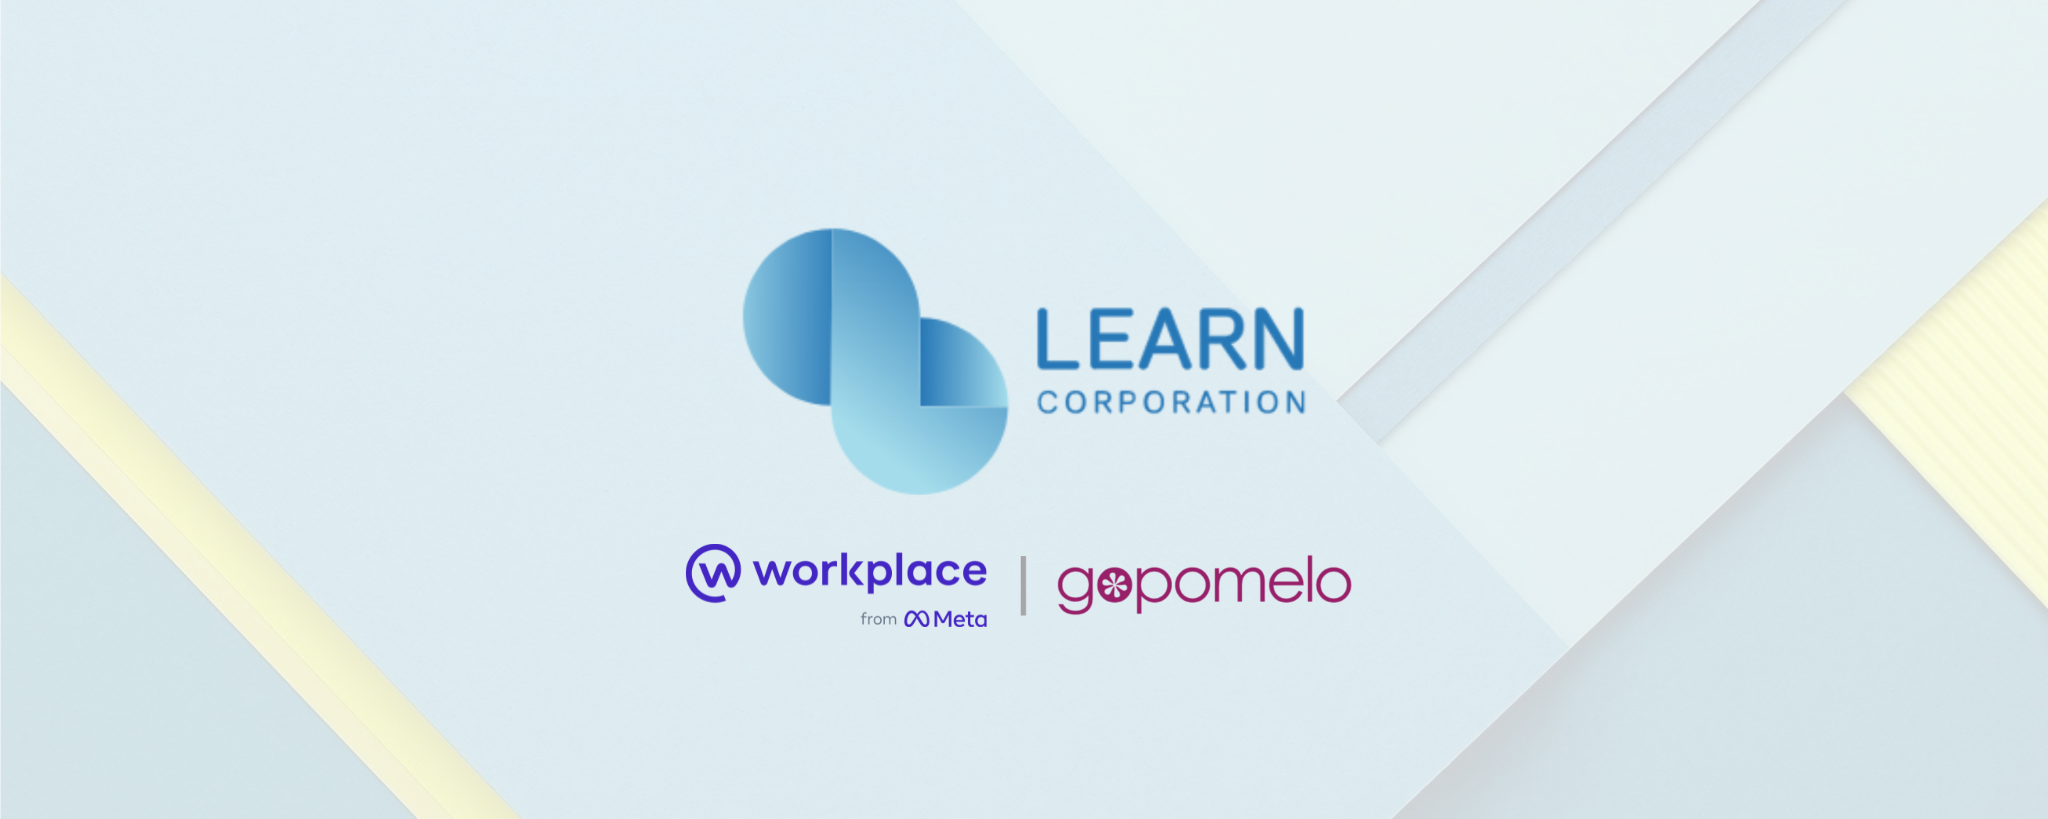 Workplace: Learn Corporation Shared their Thoughts about Workplace from Meta and GoPomelo